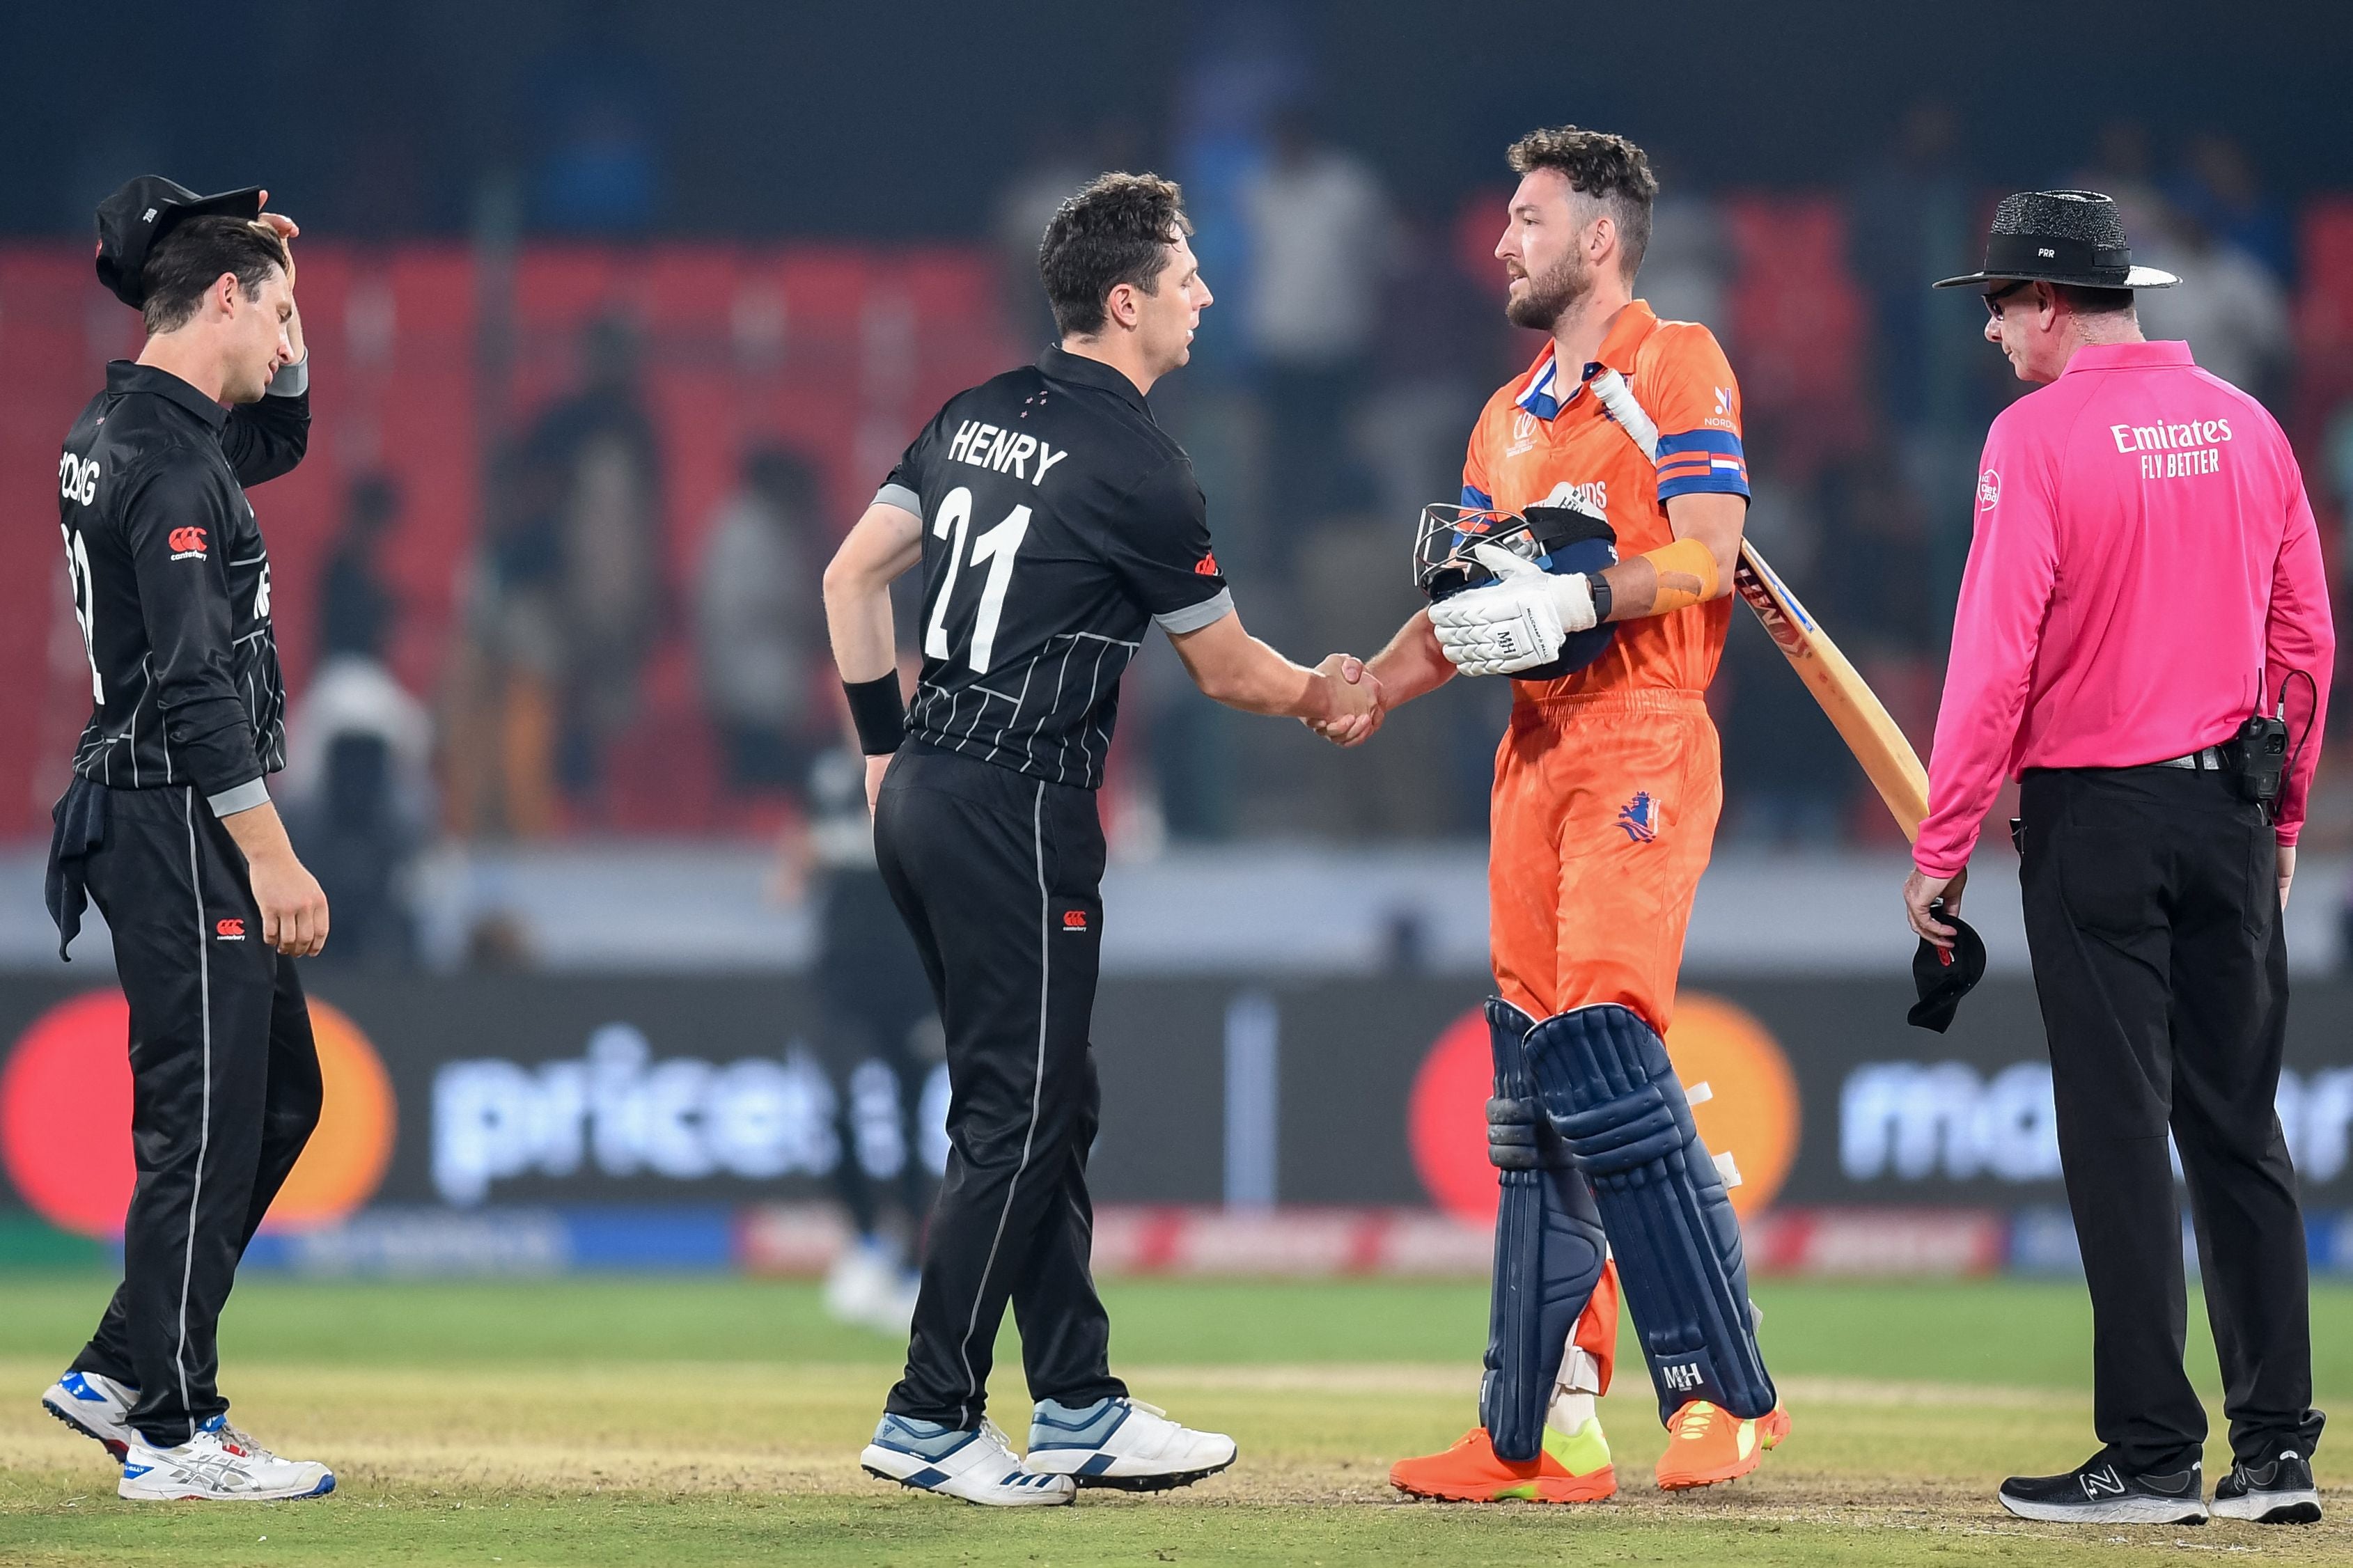 New Zealand beat The Netherlands in the Cricket World Cup